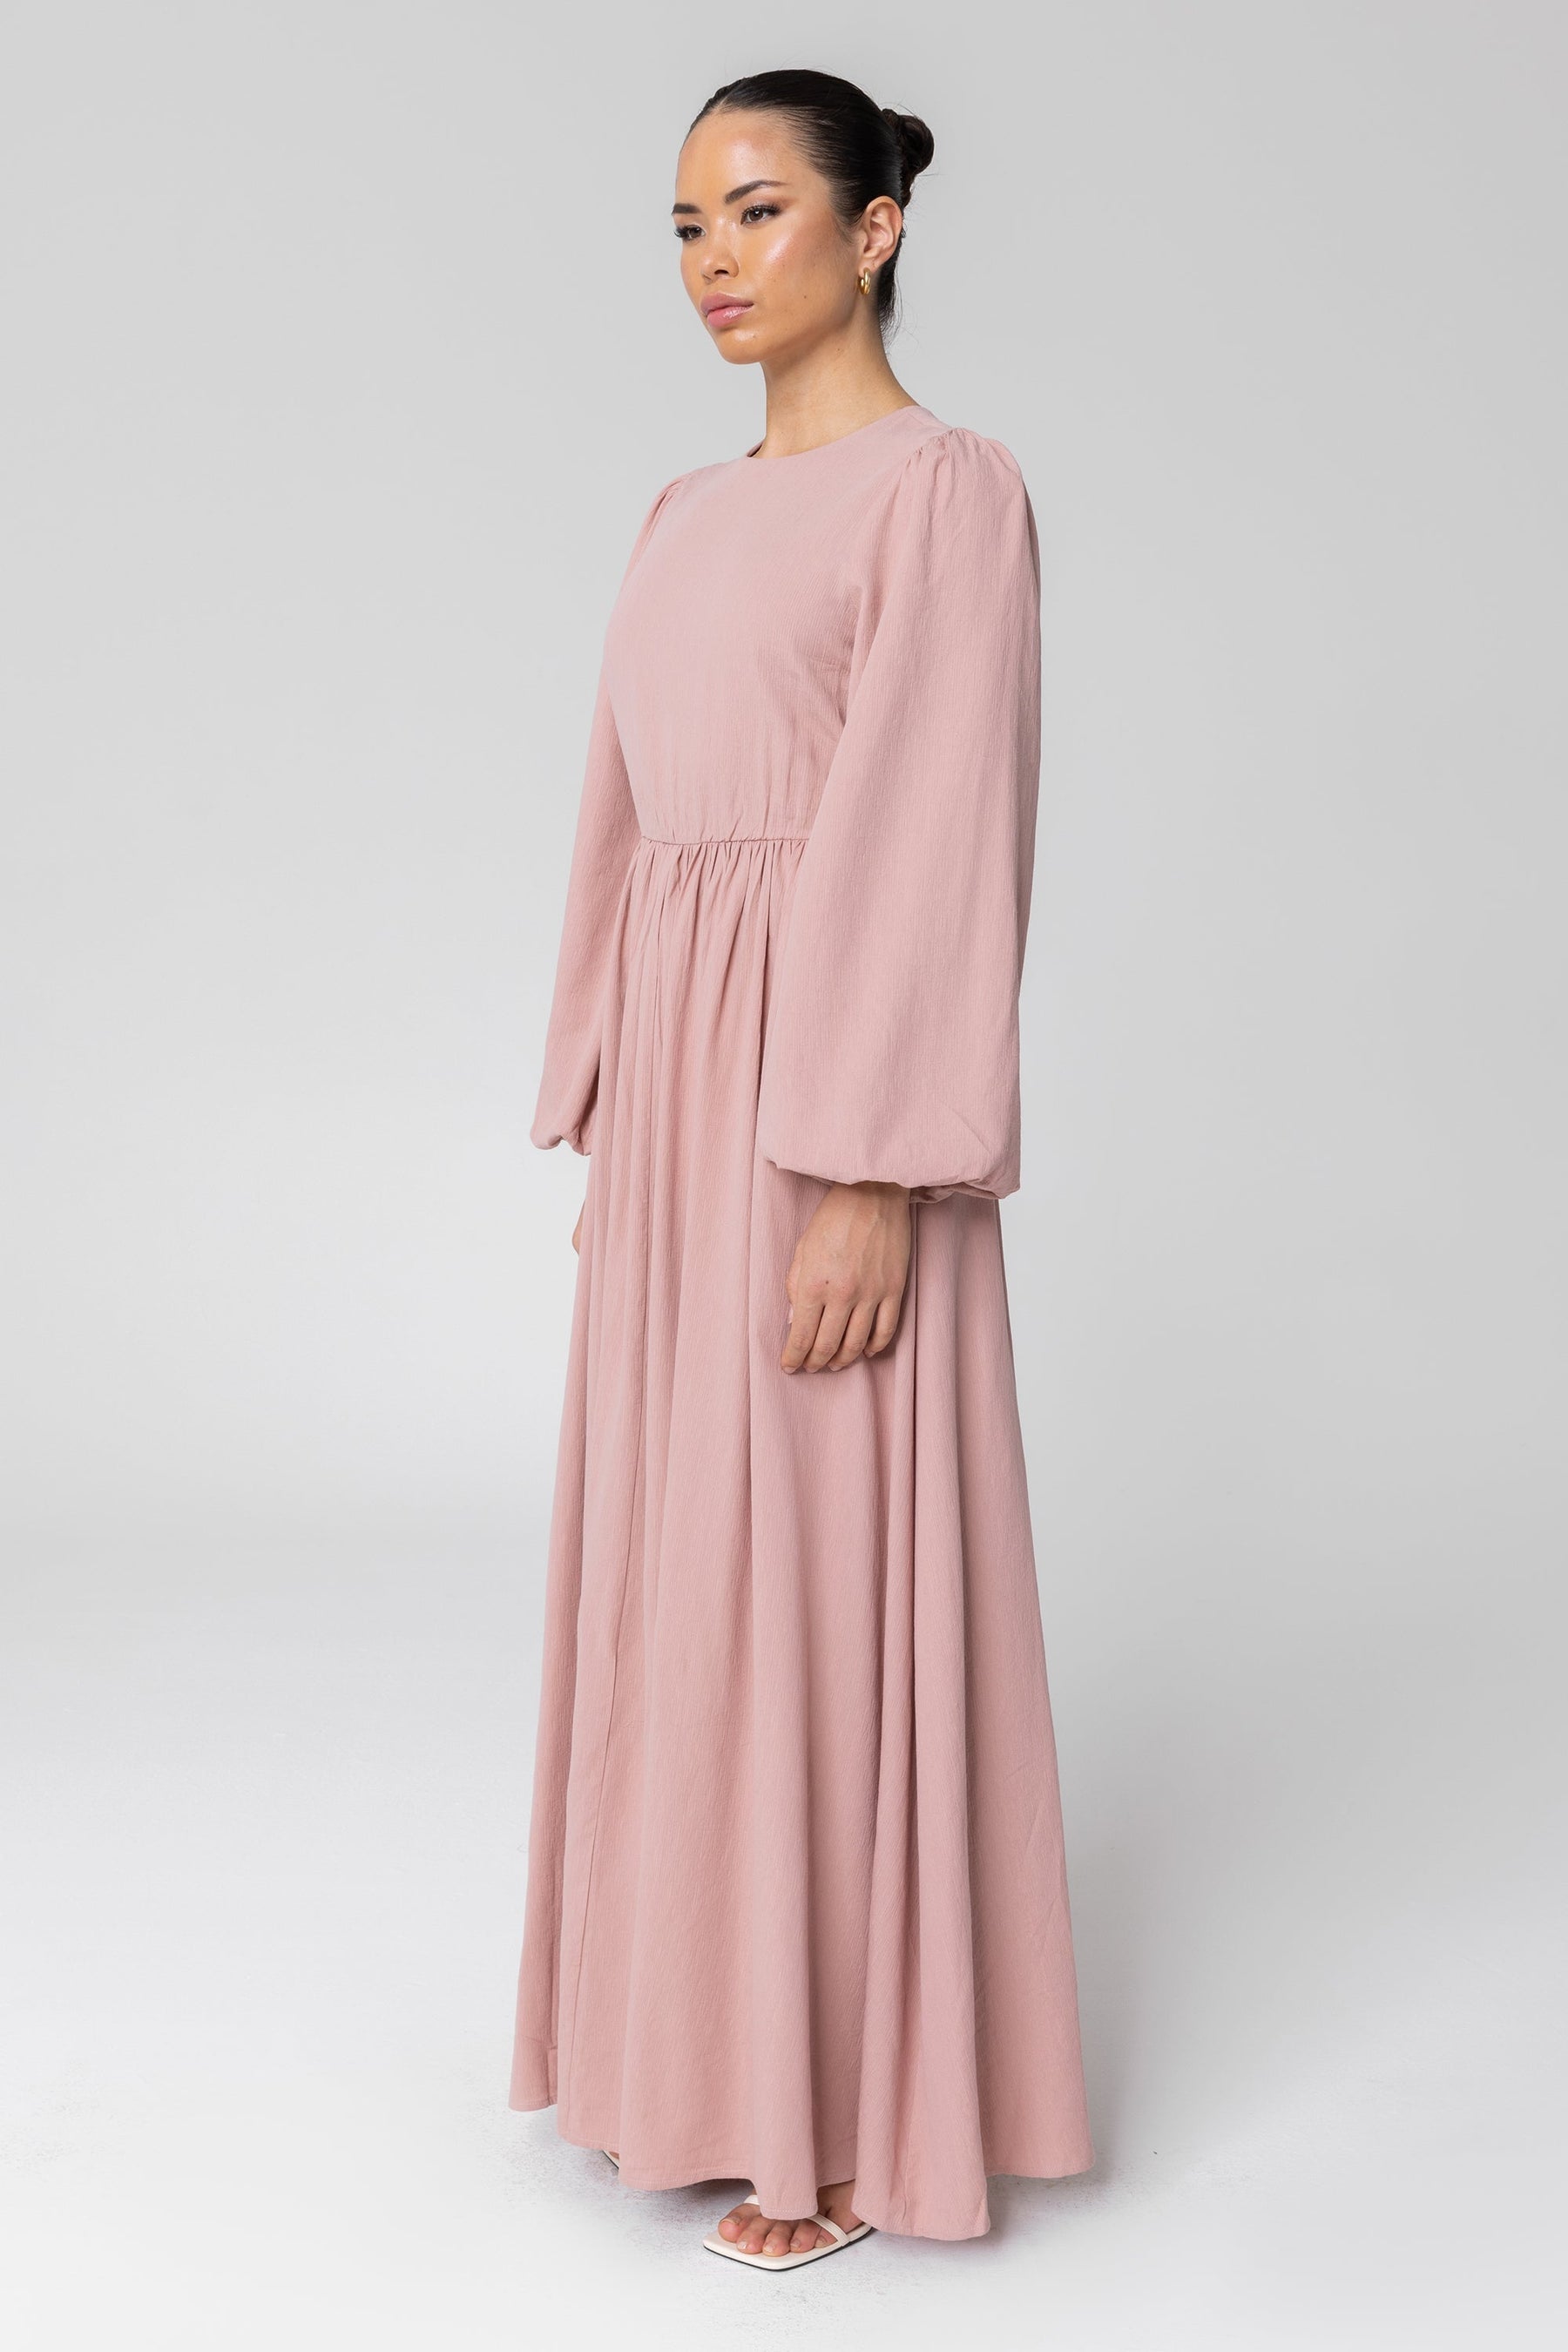 Rola Flowy A-Line Maxi Dress - Dusty Pink Veiled Collection 